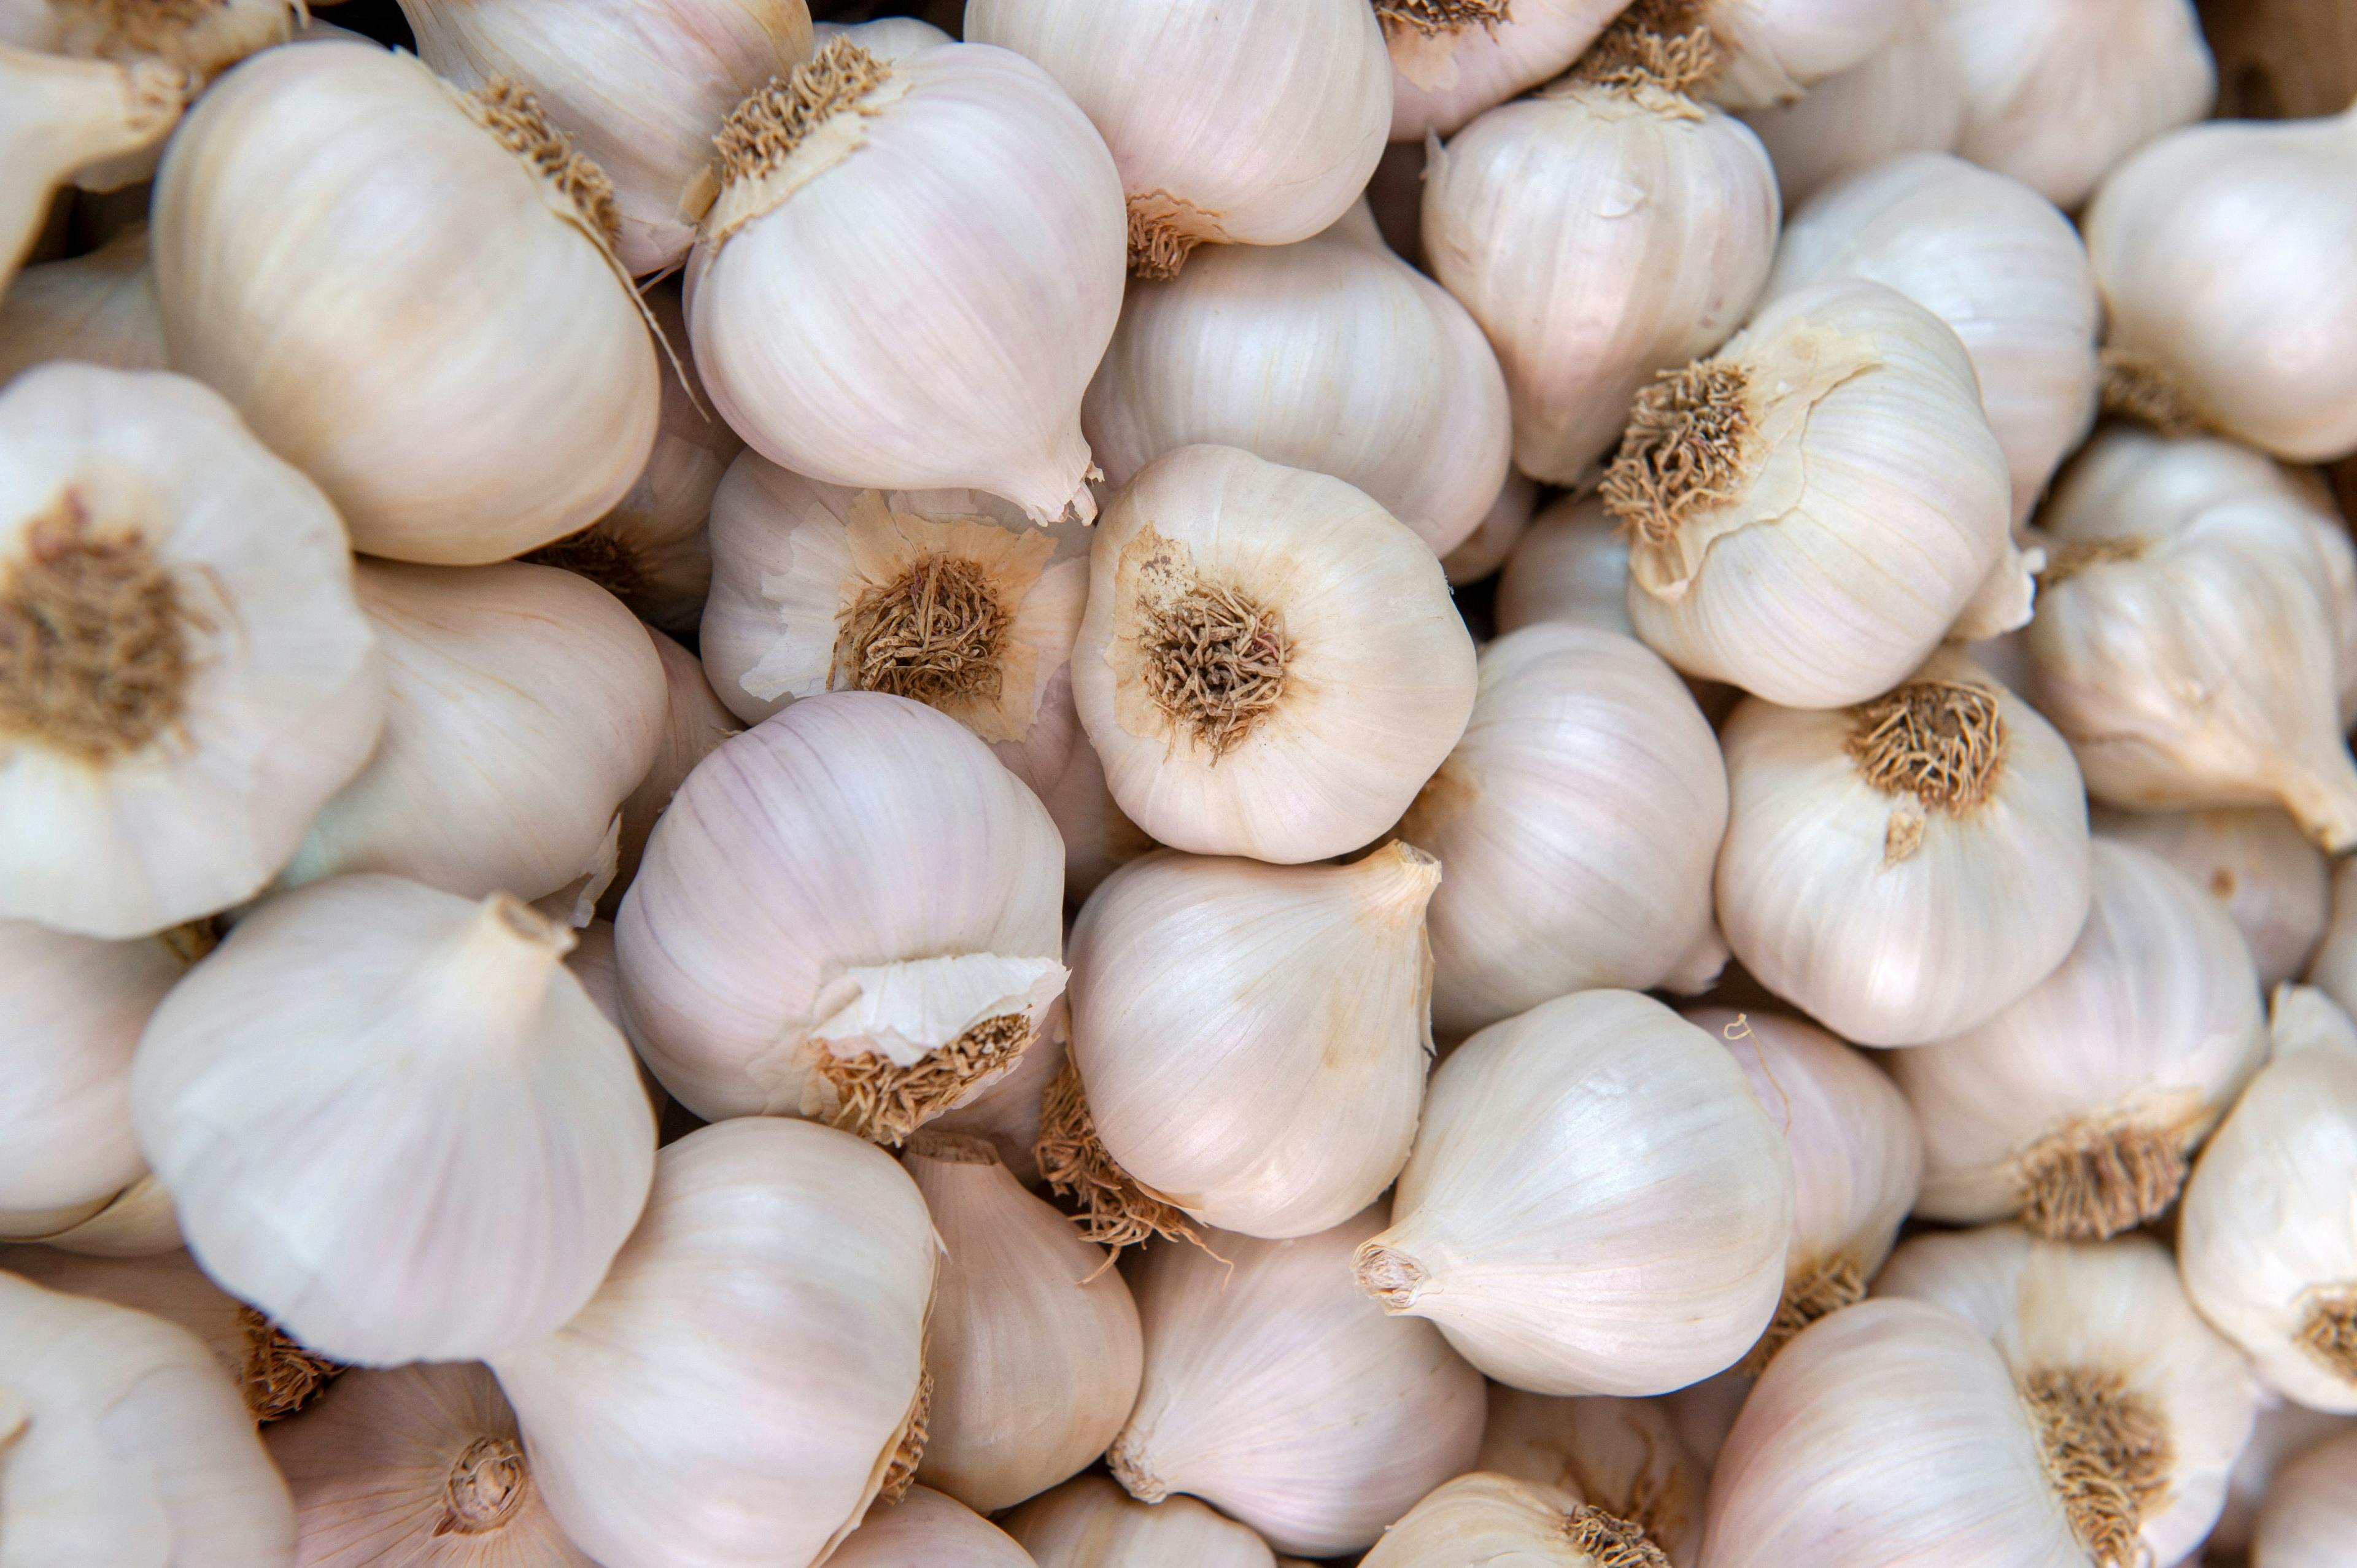 White garlic pile texture. Fresh garlic on market table closeup photo. Vitamin healthy food spice image. Spicy cooking ingredient picture. Pile of white garlic heads. © Vlad - stock.adobe.com